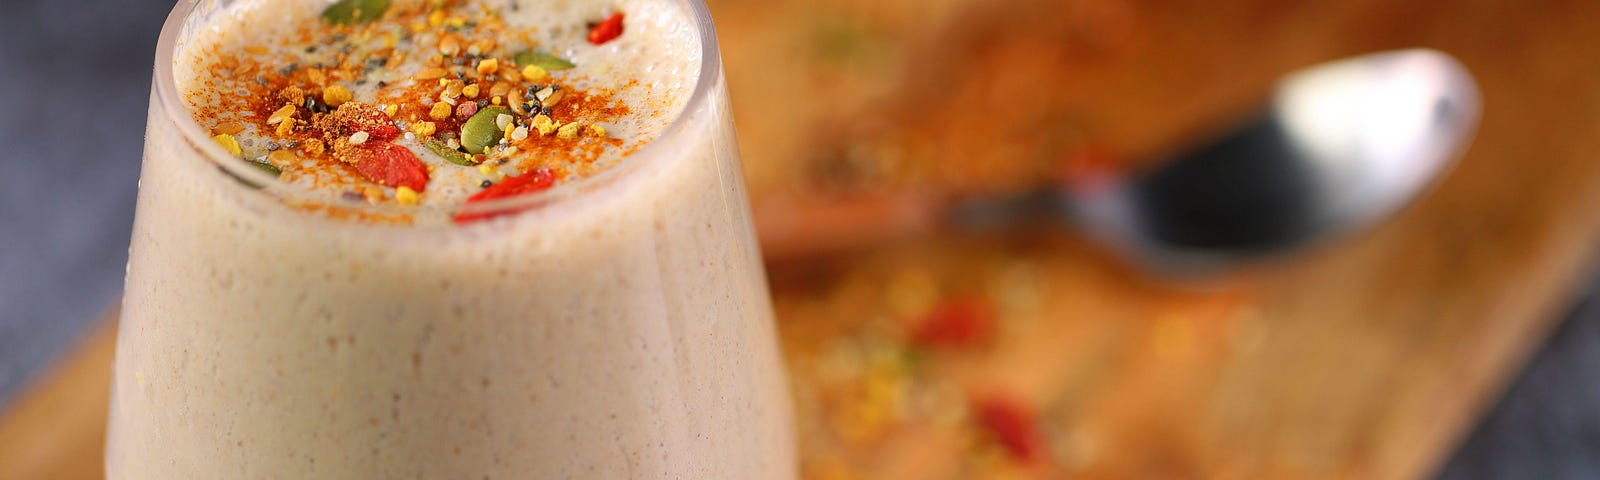 Easy Oat Smoothie Recipes for Weight Loss- an apple oat smoothie